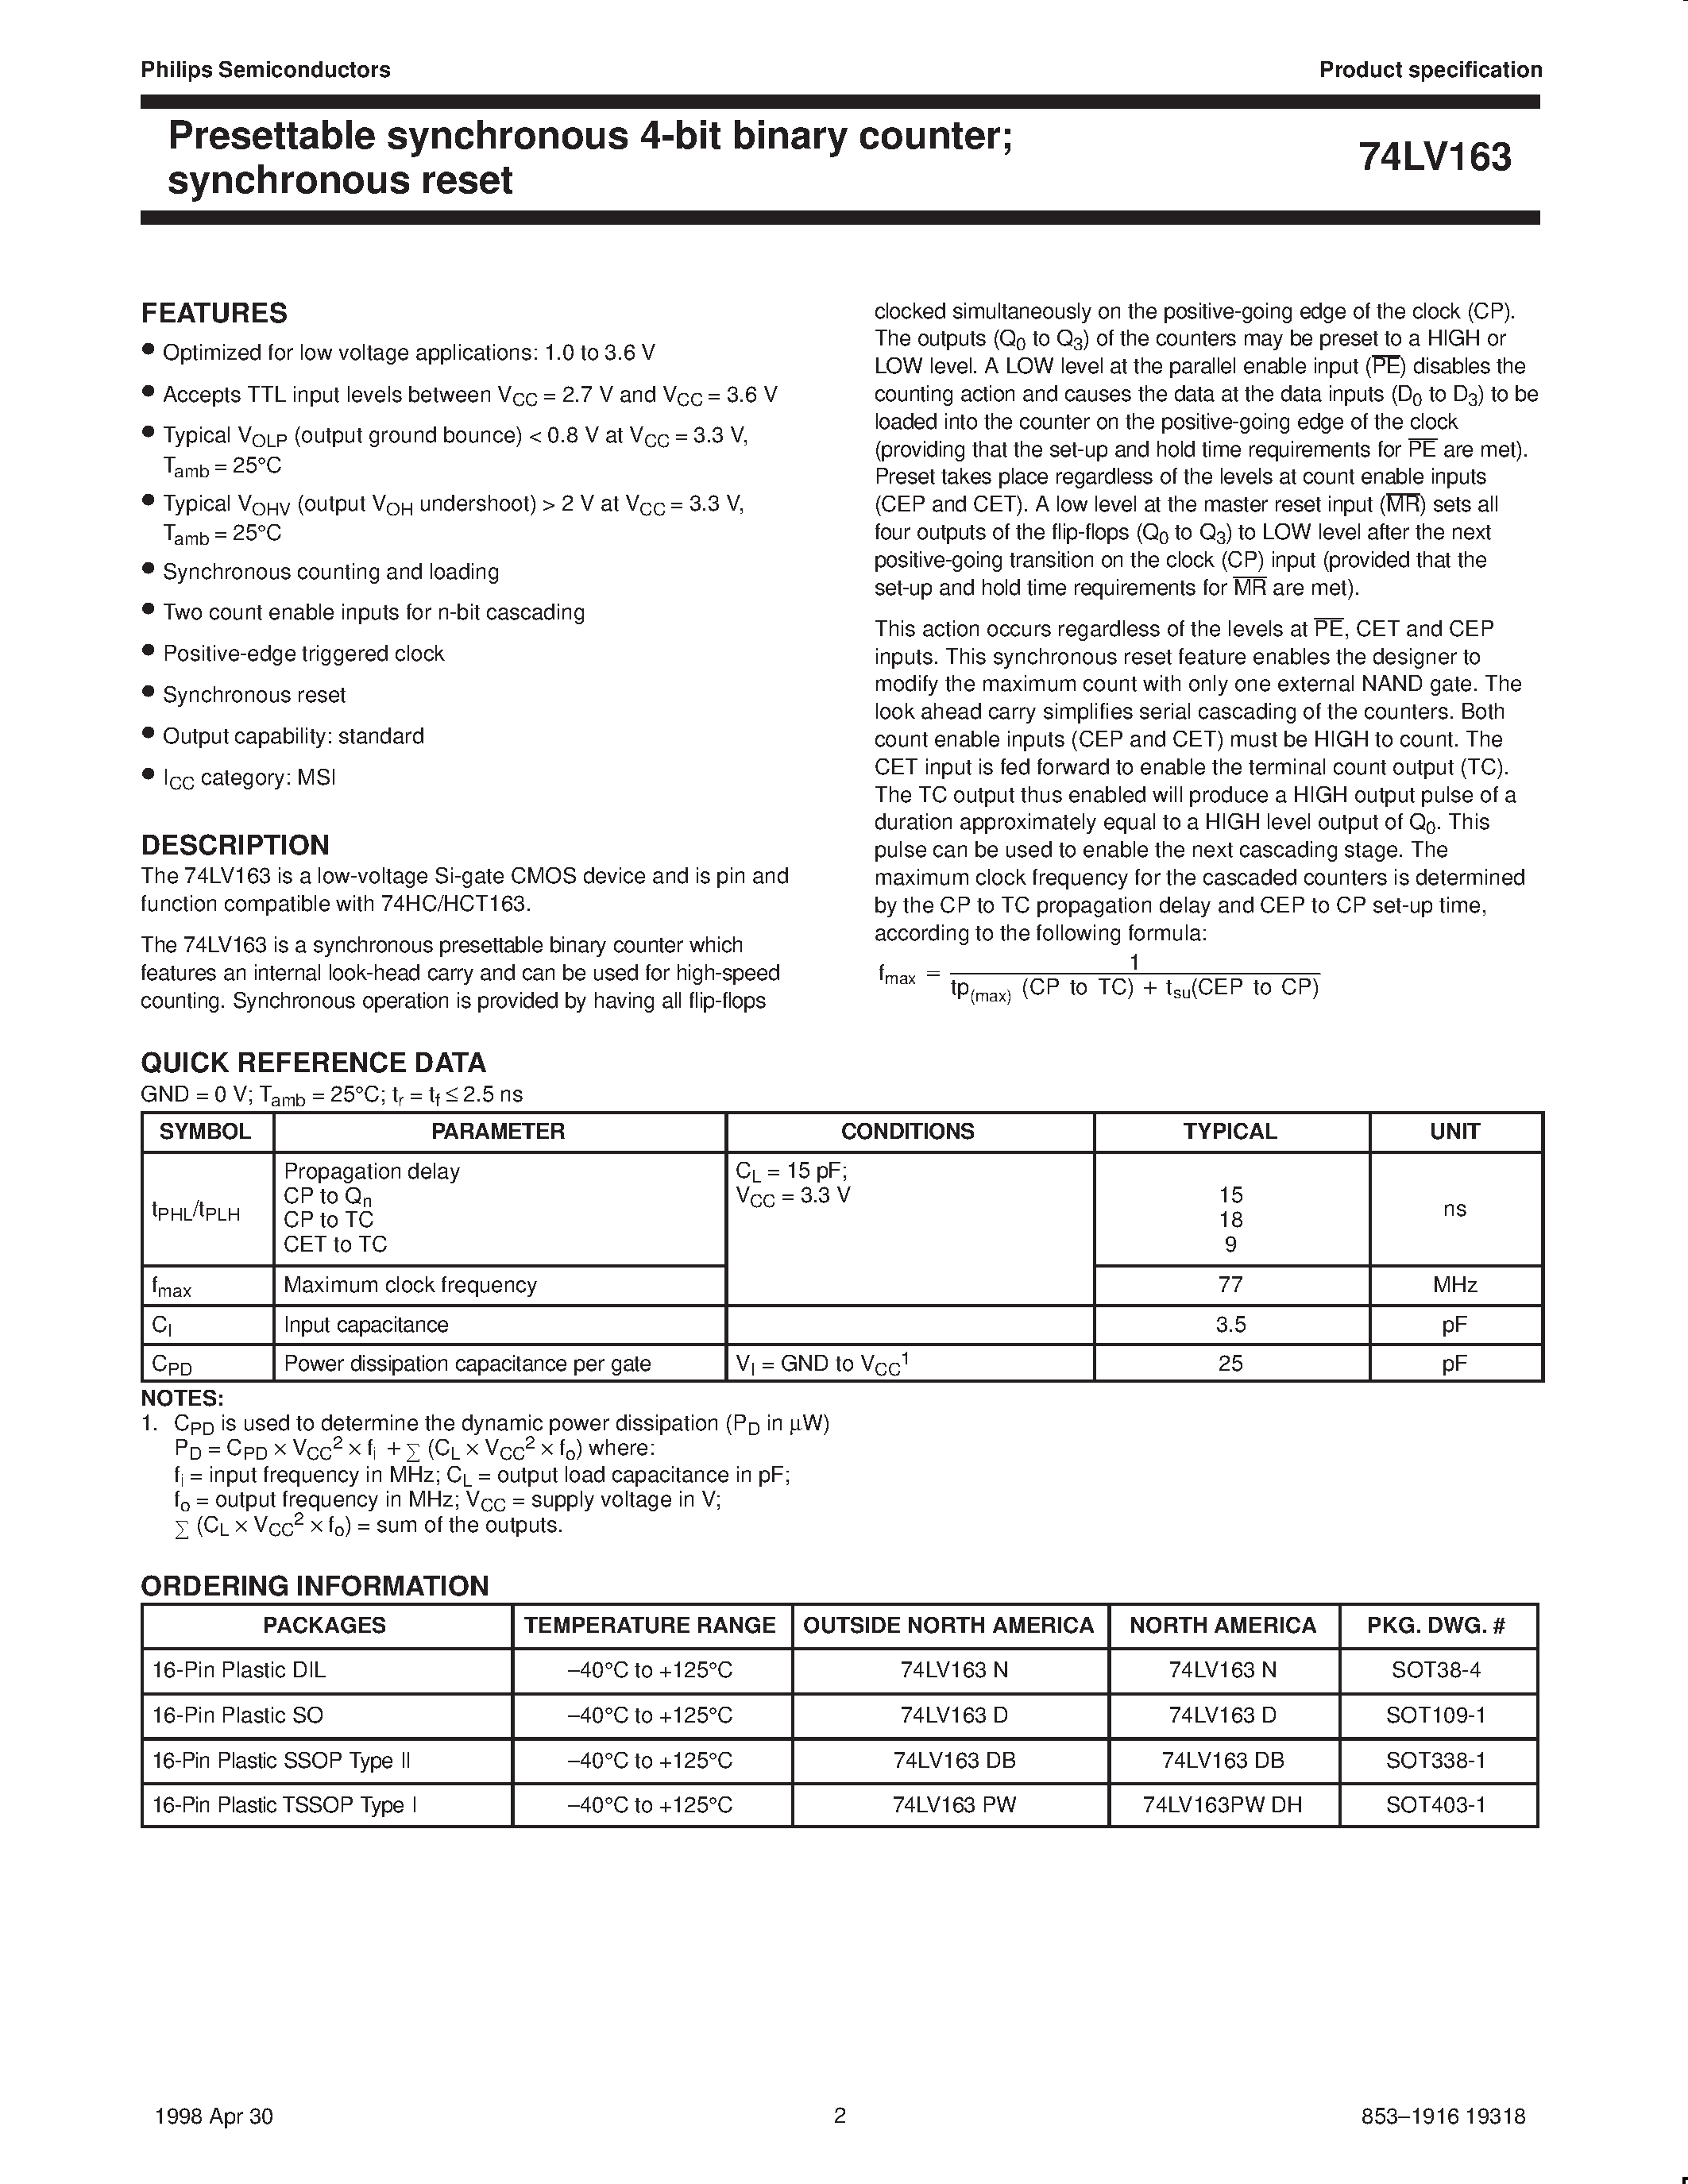 Datasheet 74LV163 - Presettable synchronous 4-bit binary counter; synchronous reset page 2